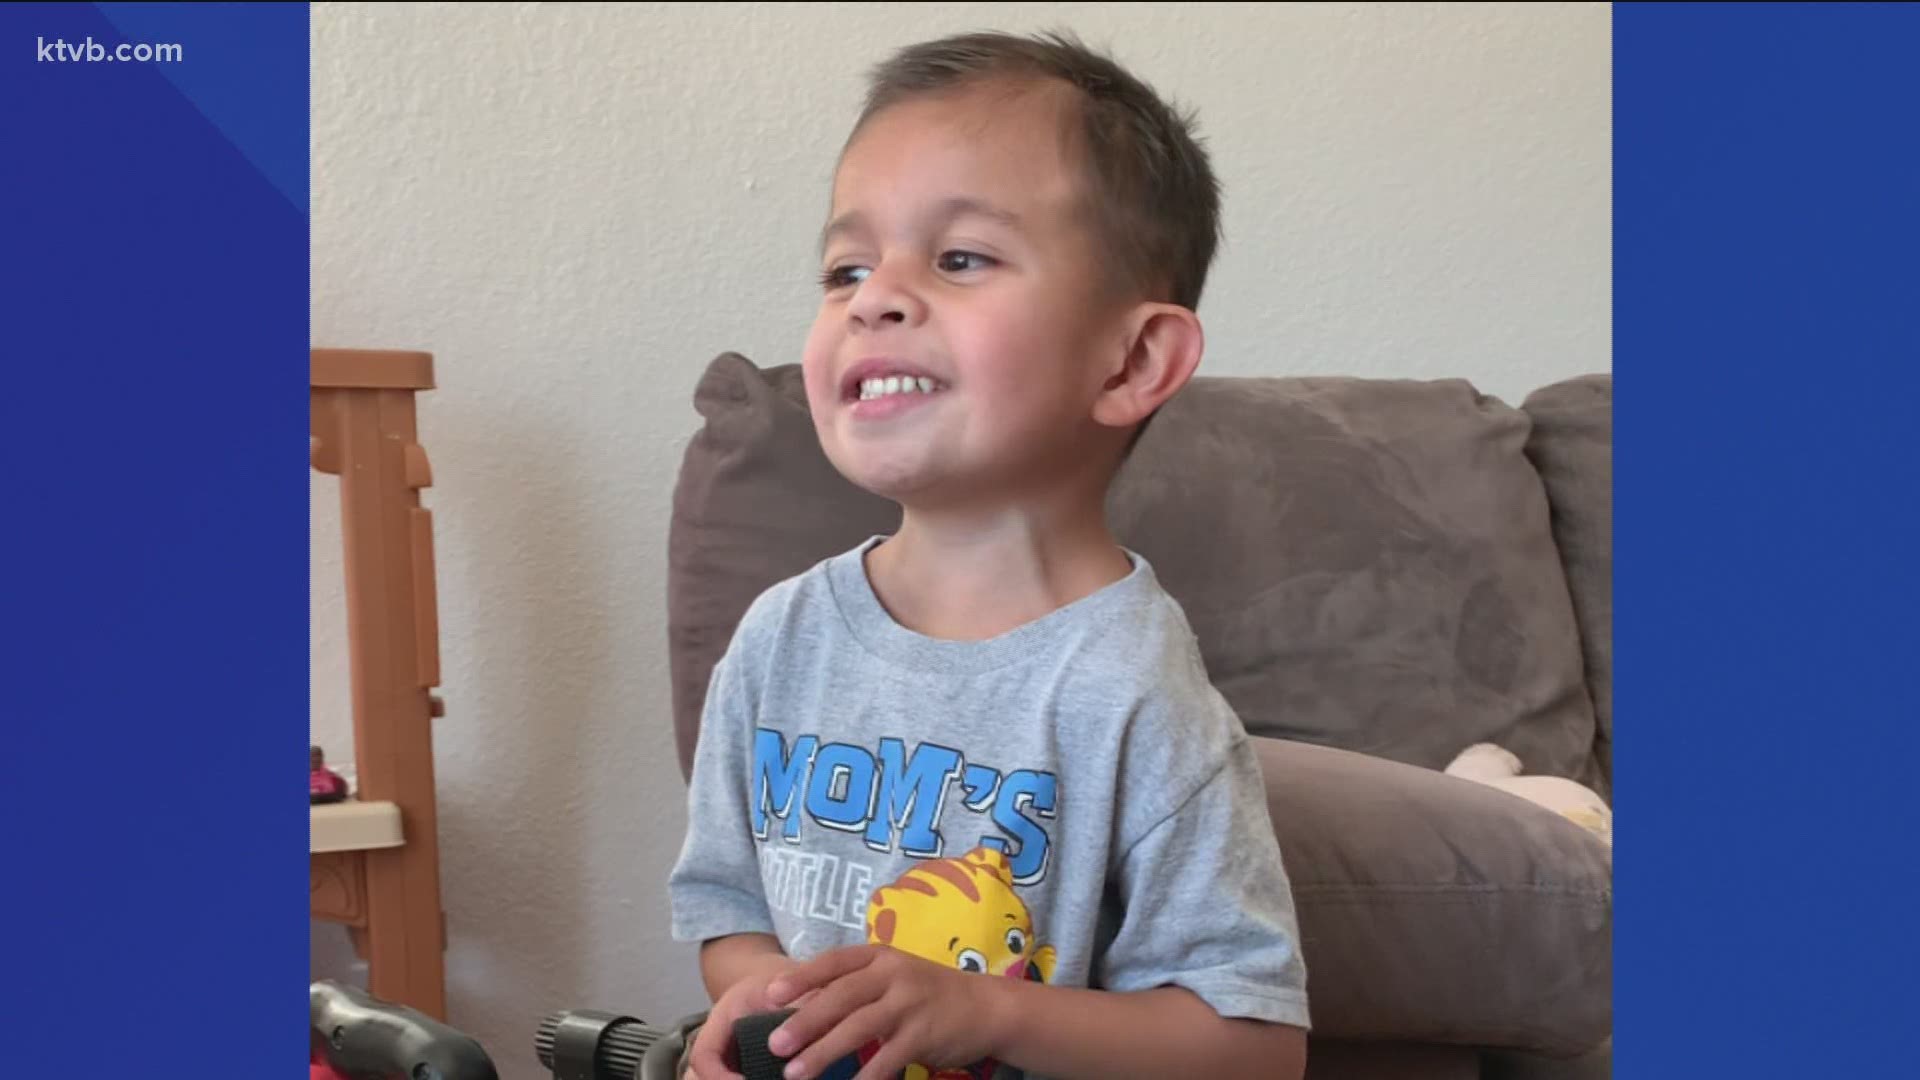 Joaquin has Emanuel syndrome, which there are only 500 cases of it reported worldwide, and his mom said, “He just fights hard at every little thing that he does."